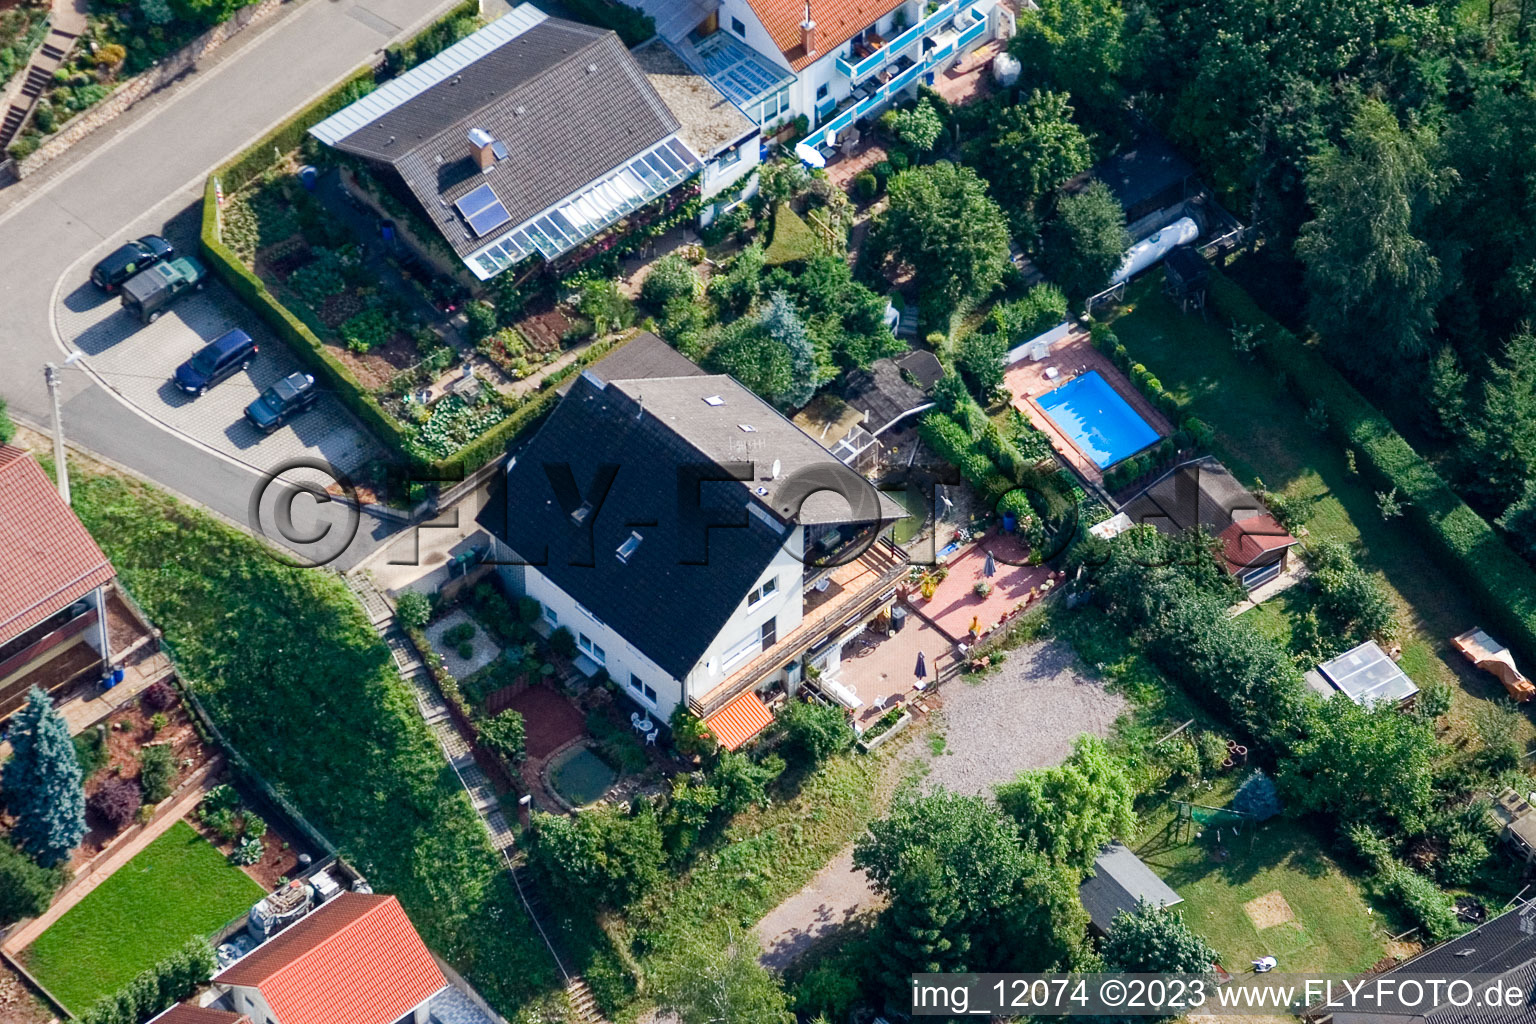 District Gräfenhausen in Annweiler am Trifels in the state Rhineland-Palatinate, Germany from the drone perspective